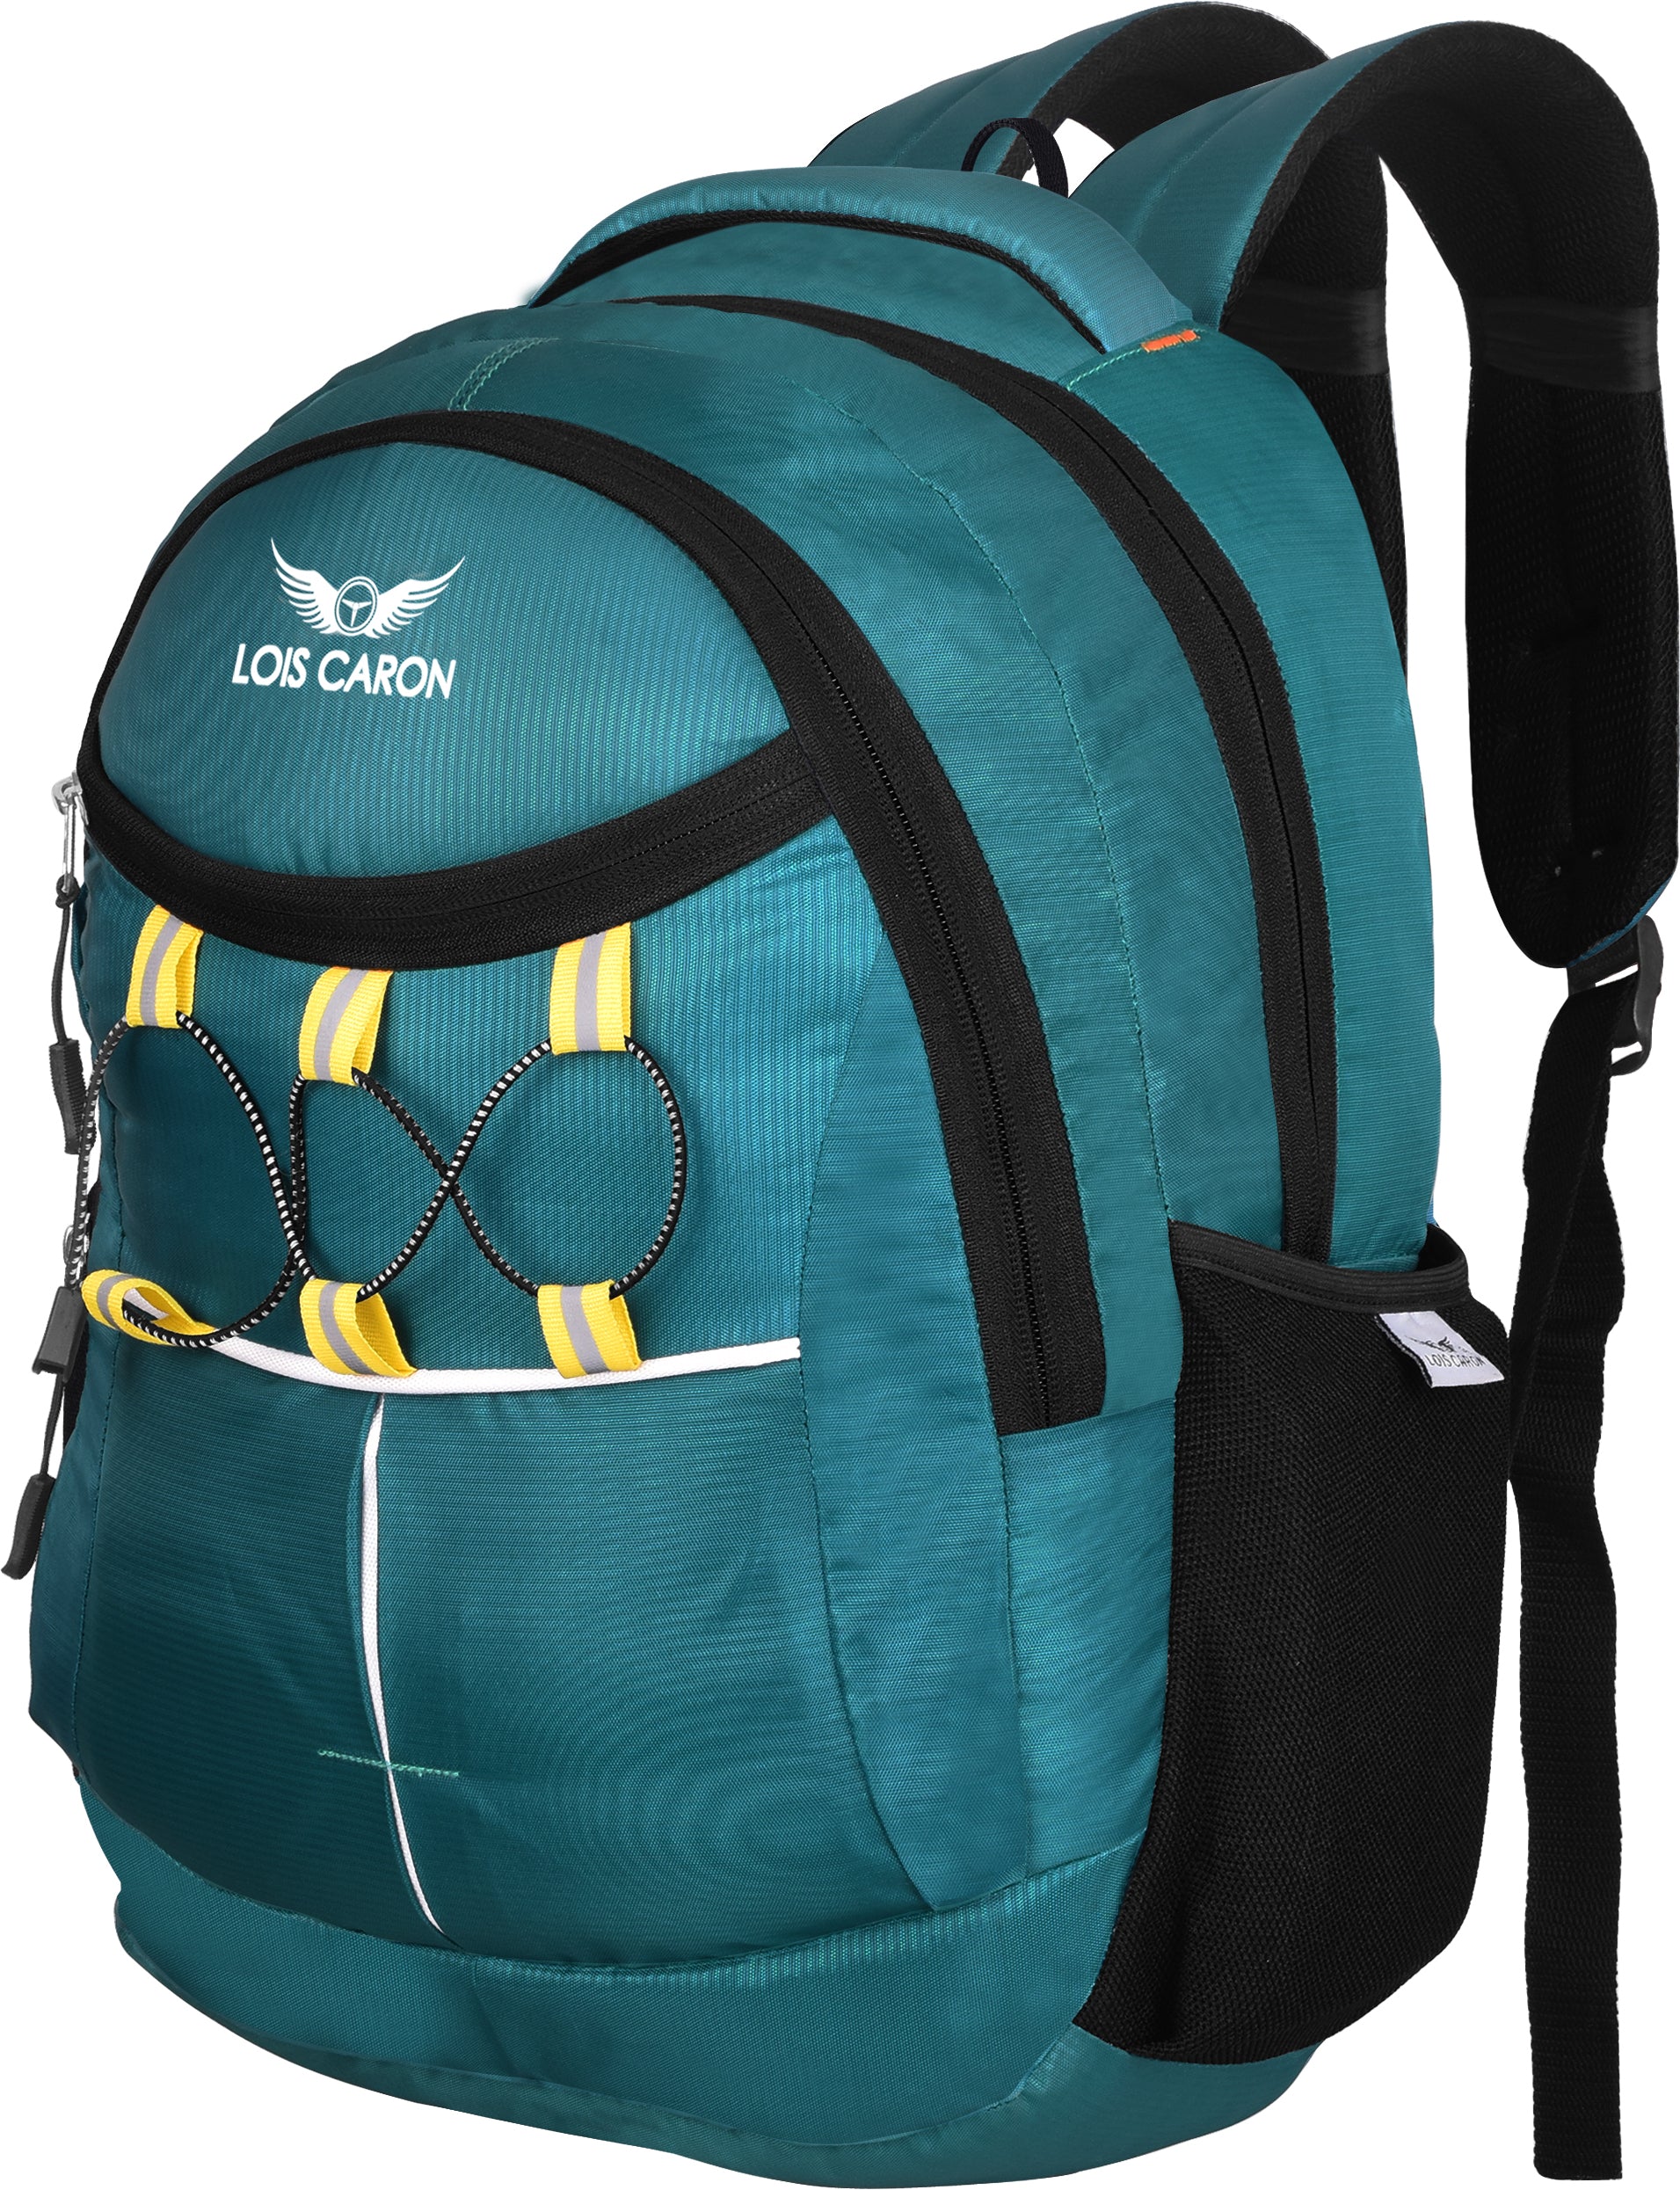 Laptop Backpack Sea Green Color Laptop Backpack With Raincover Hi-Storage Waterproof Backpack  (Green, 35 L) LCB-035